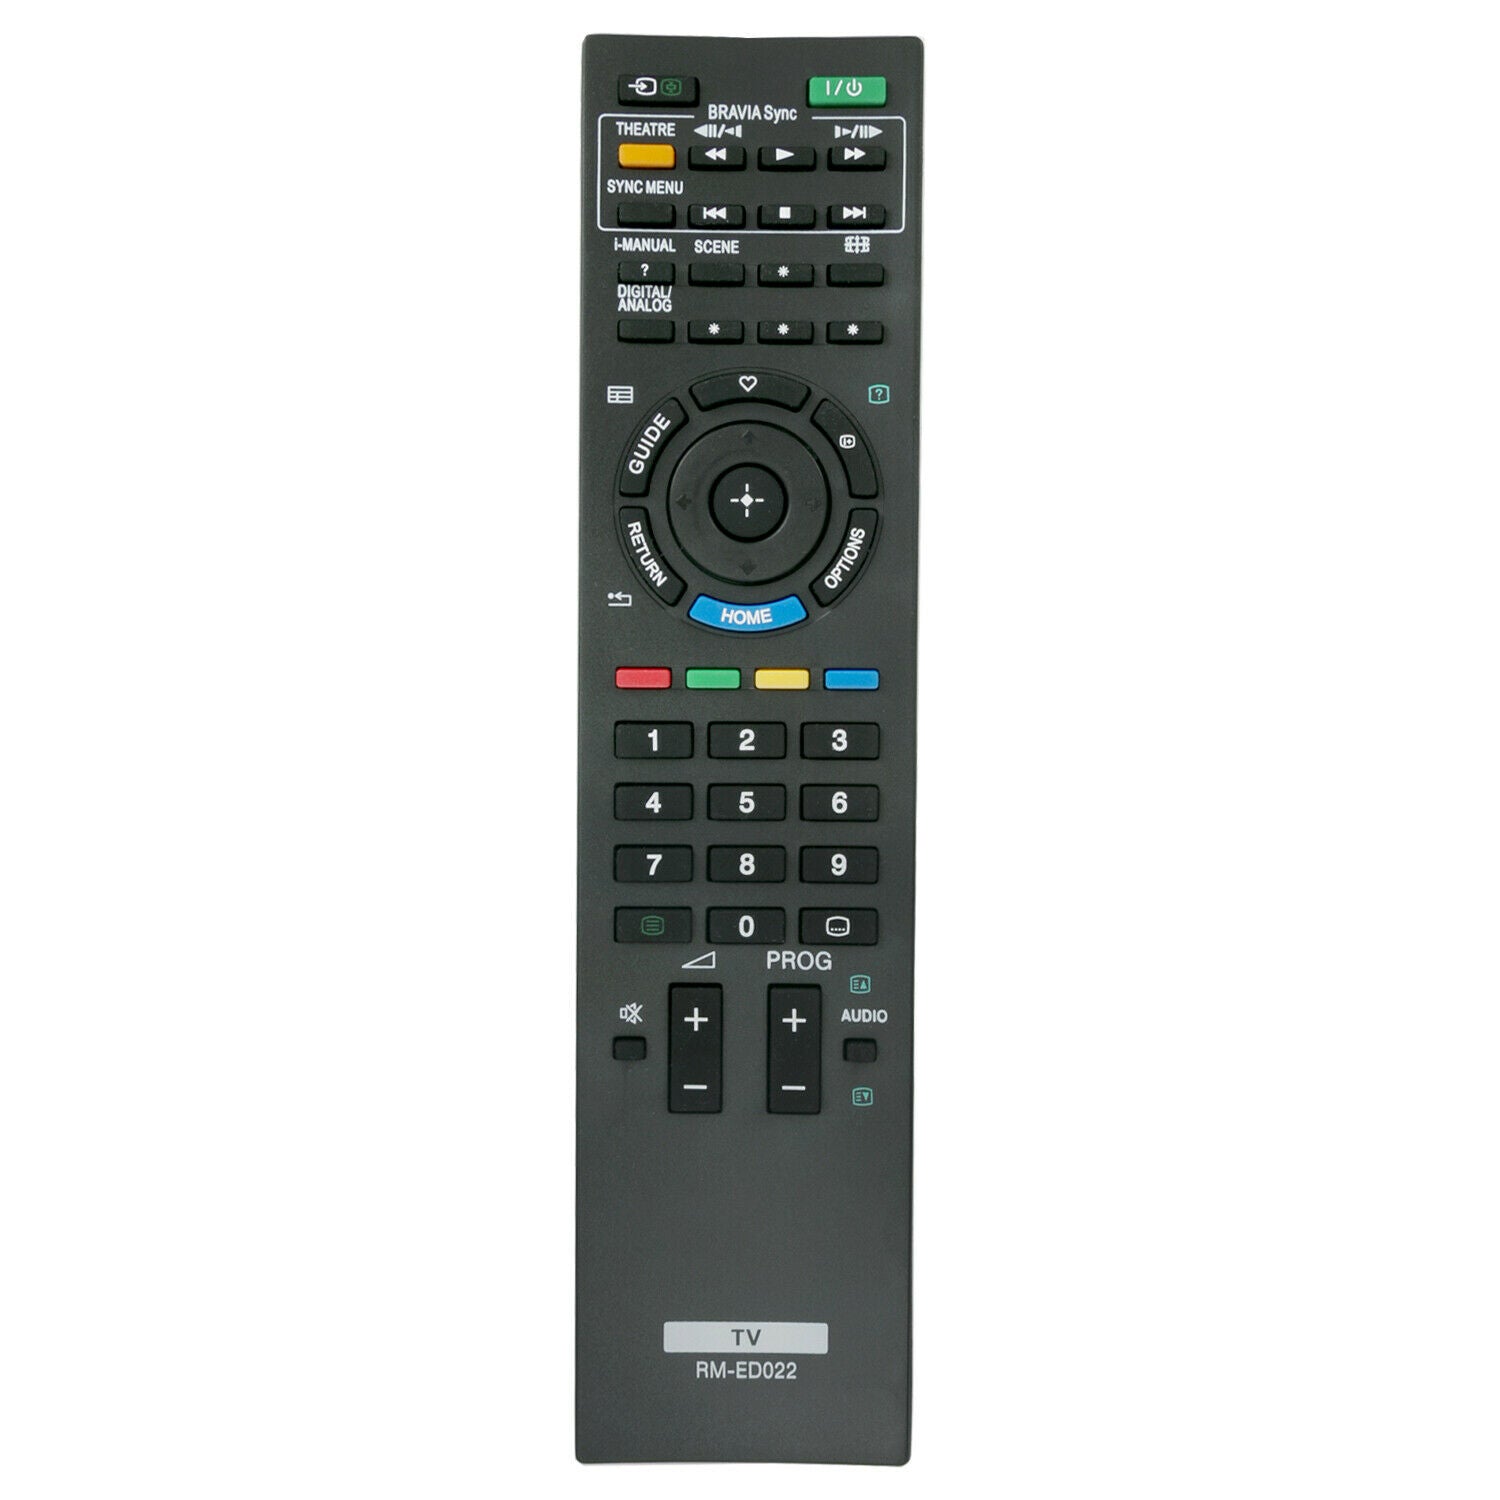 RM-ED022 Replacement Remote Control for Sony KDL-32BX300 KDL-40BX400 32BX400